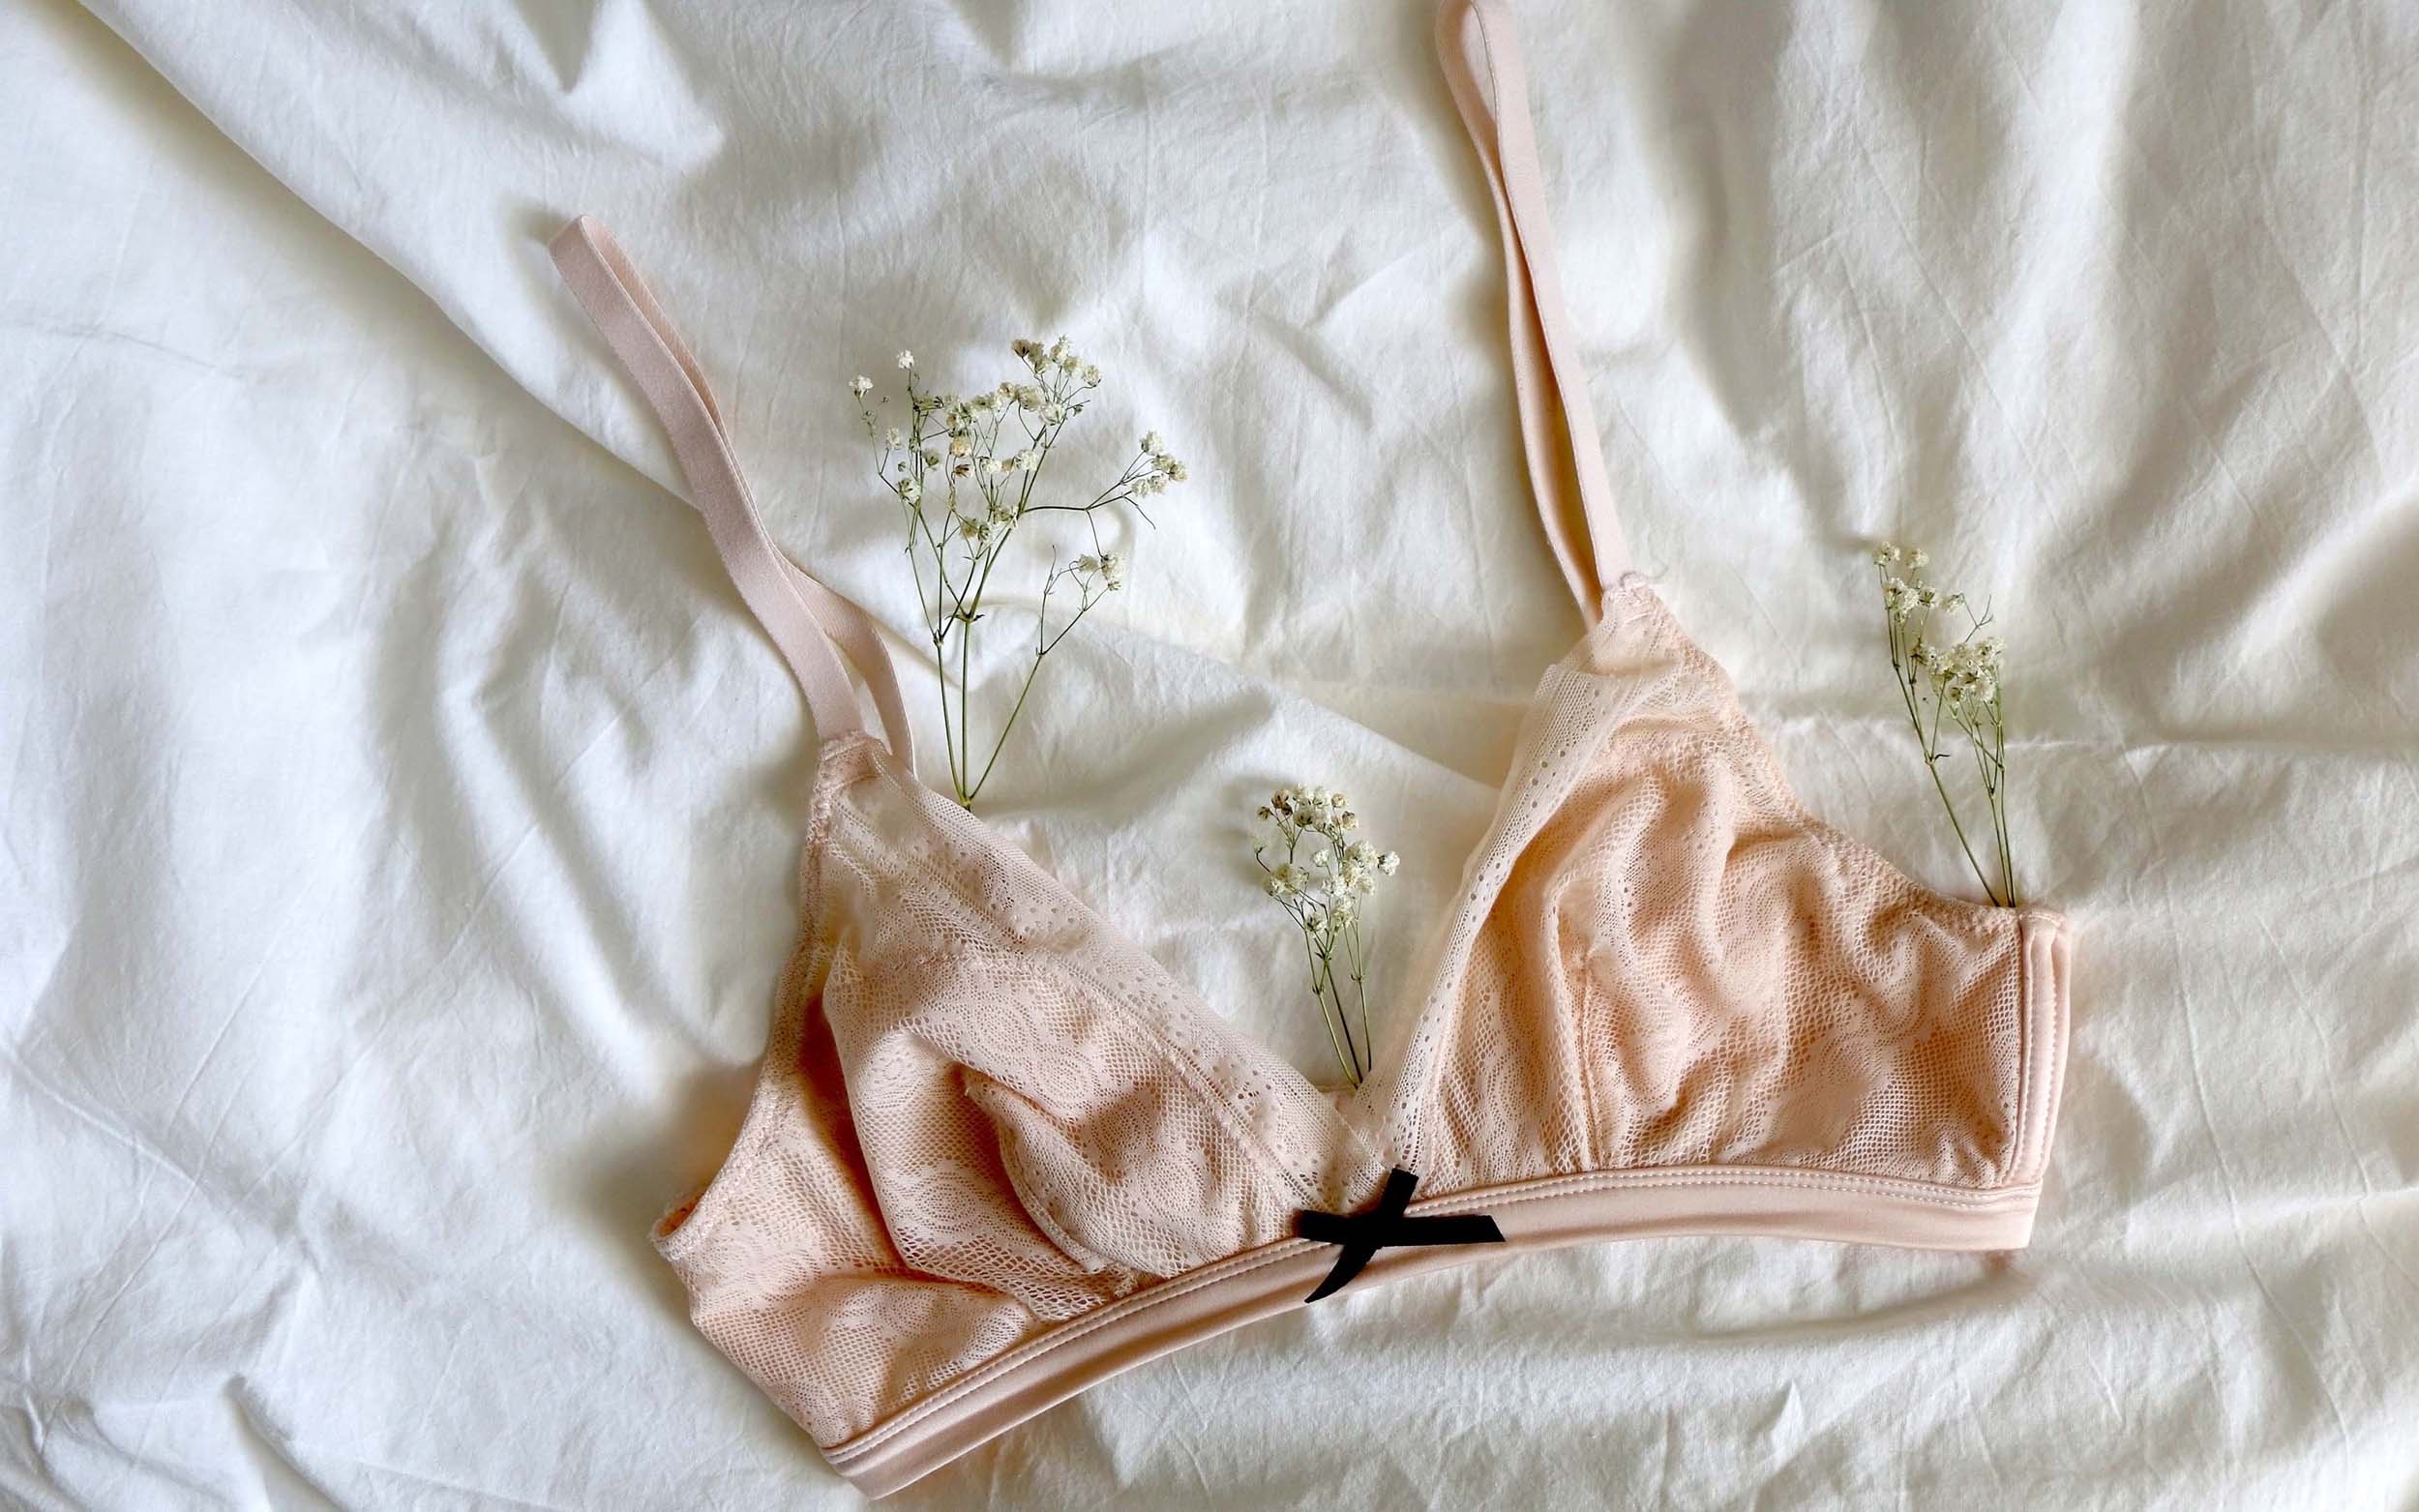 Top tips for washing and storing your lingerie